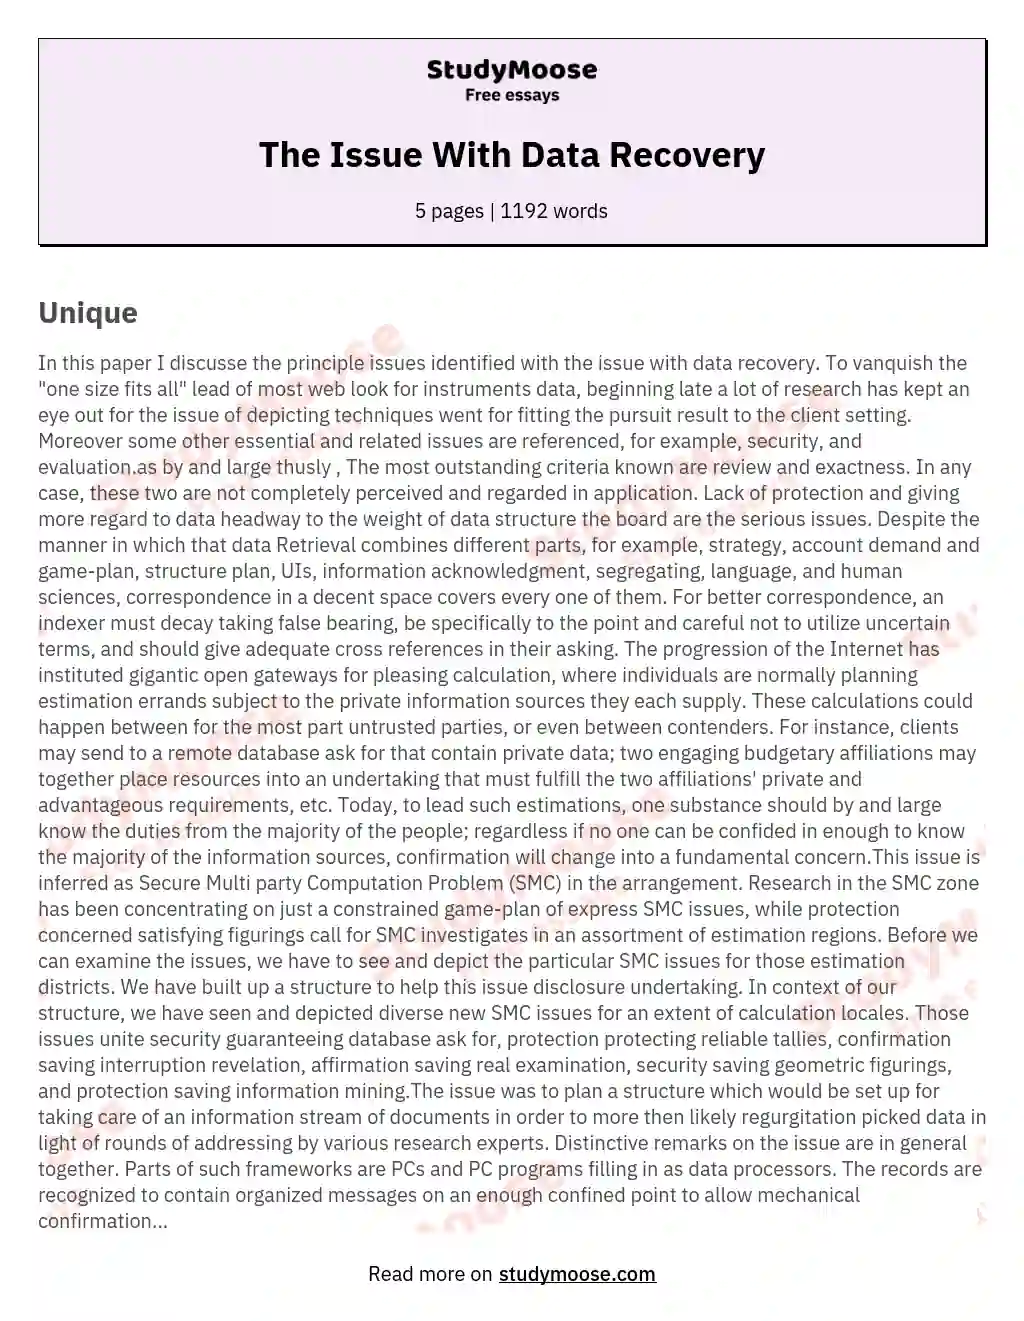 The Issue With Data Recovery essay